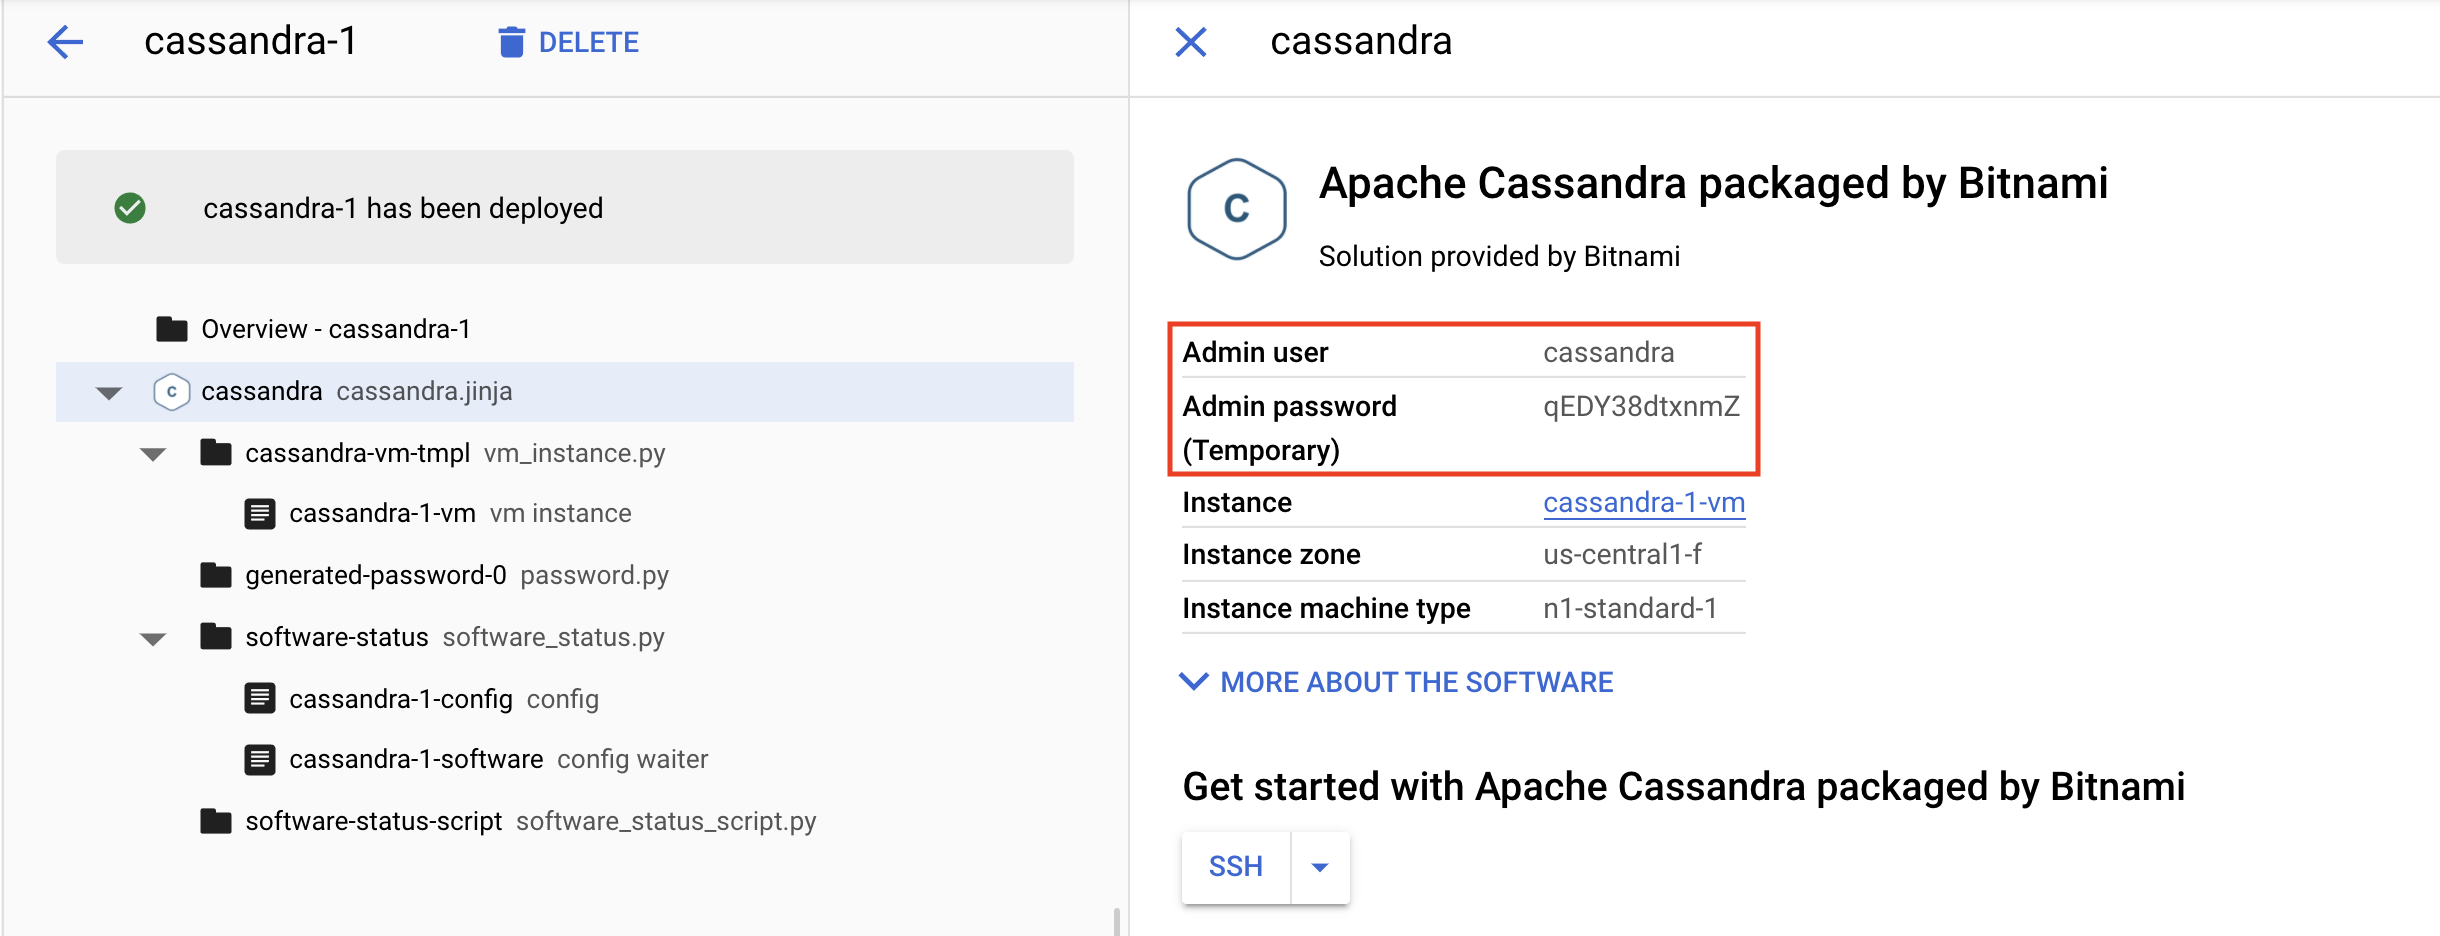 Cassandra window displaying the highlighted Admin user and Admin password